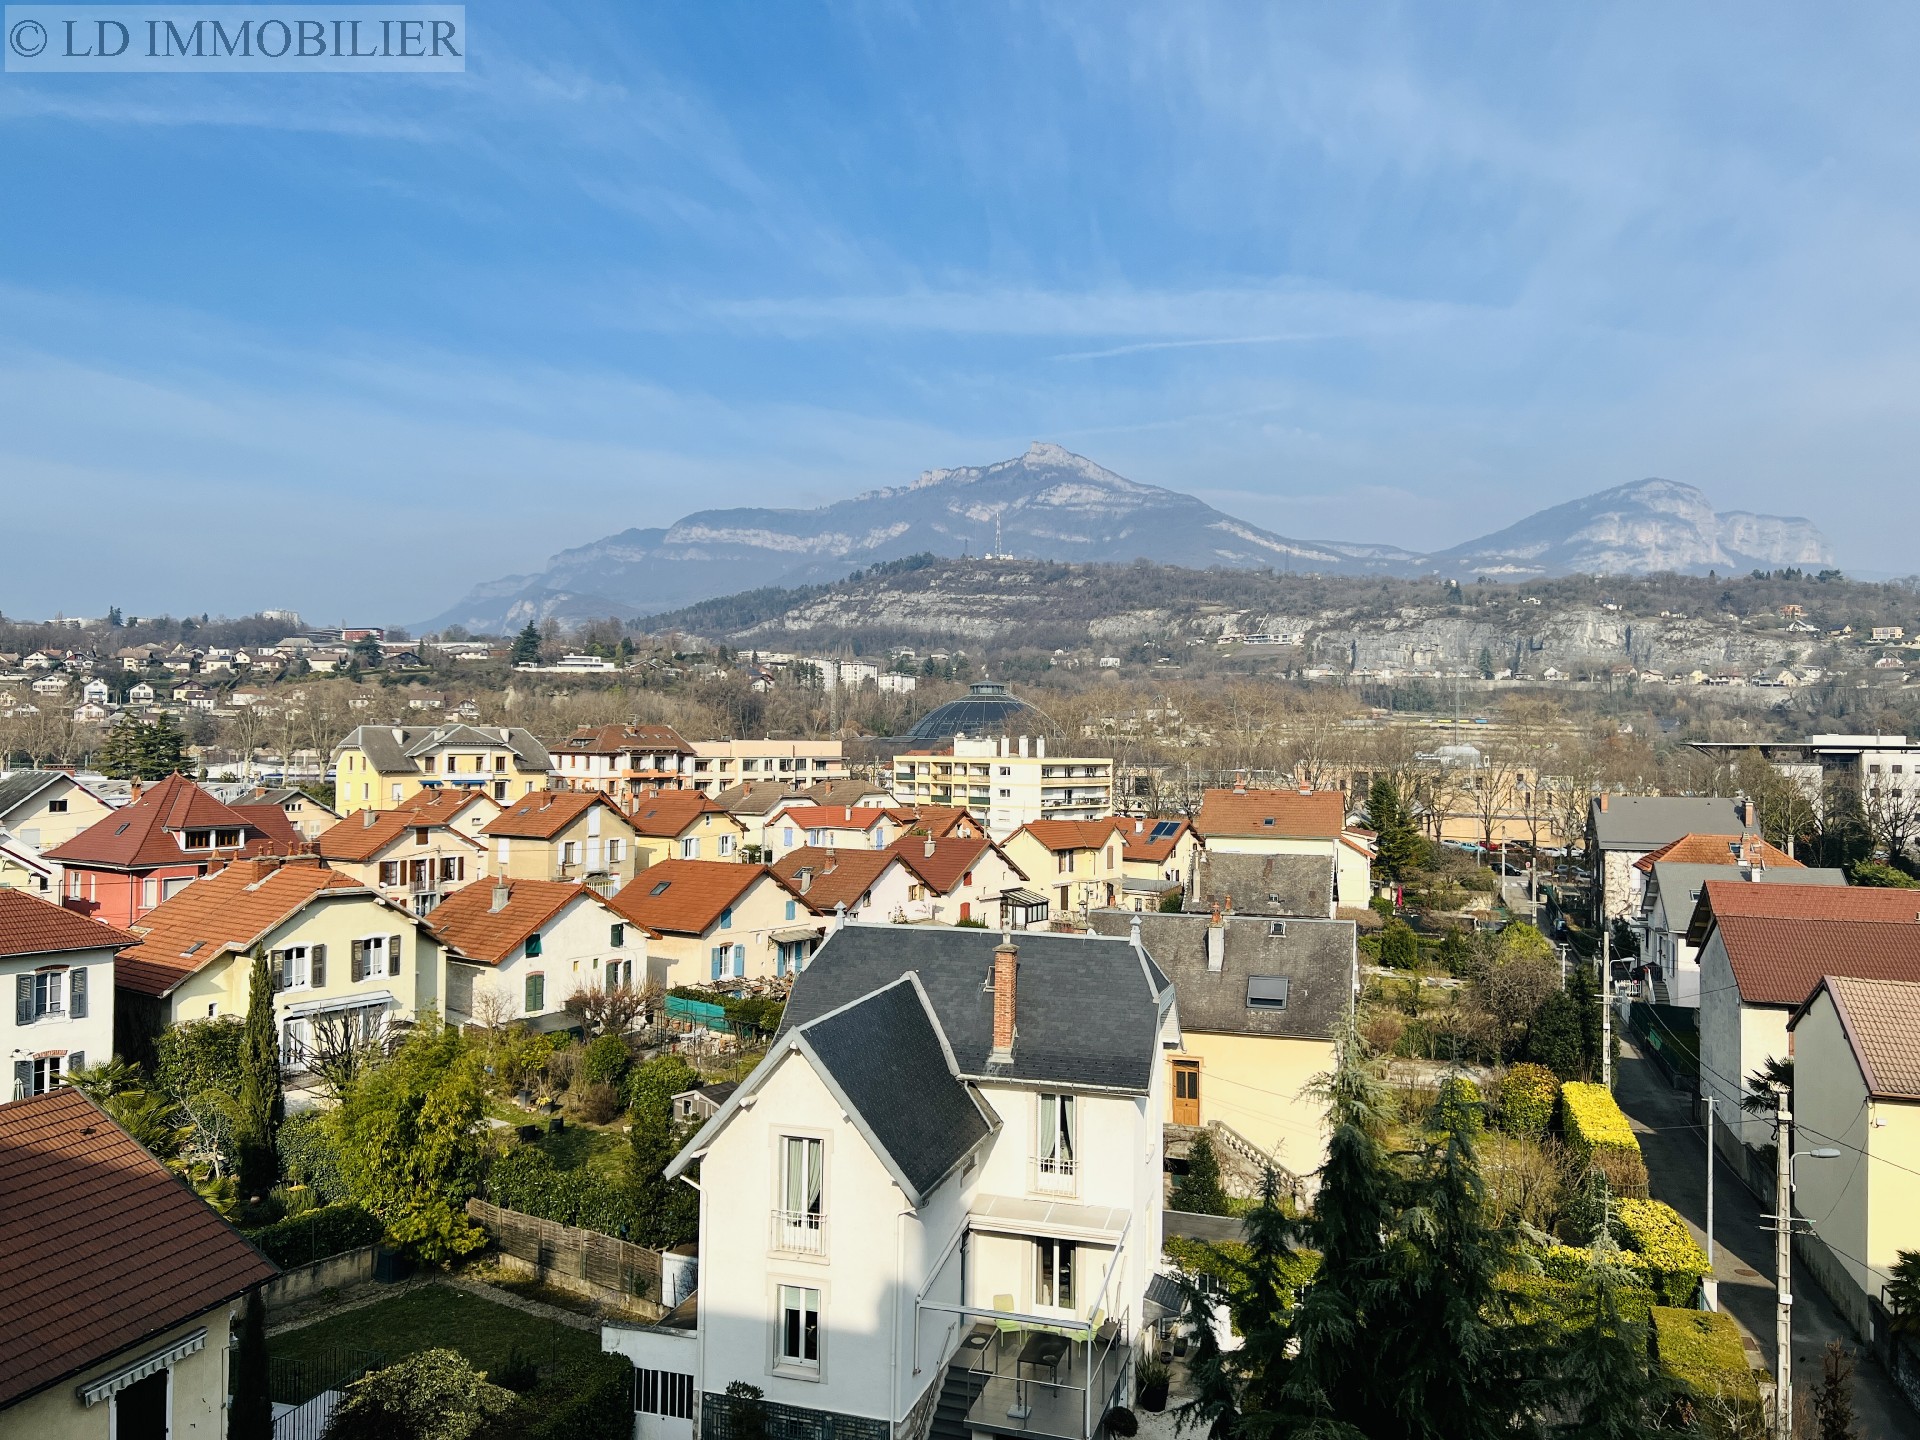 Vente appartement - CHAMBERY 76 m², 3 pièces